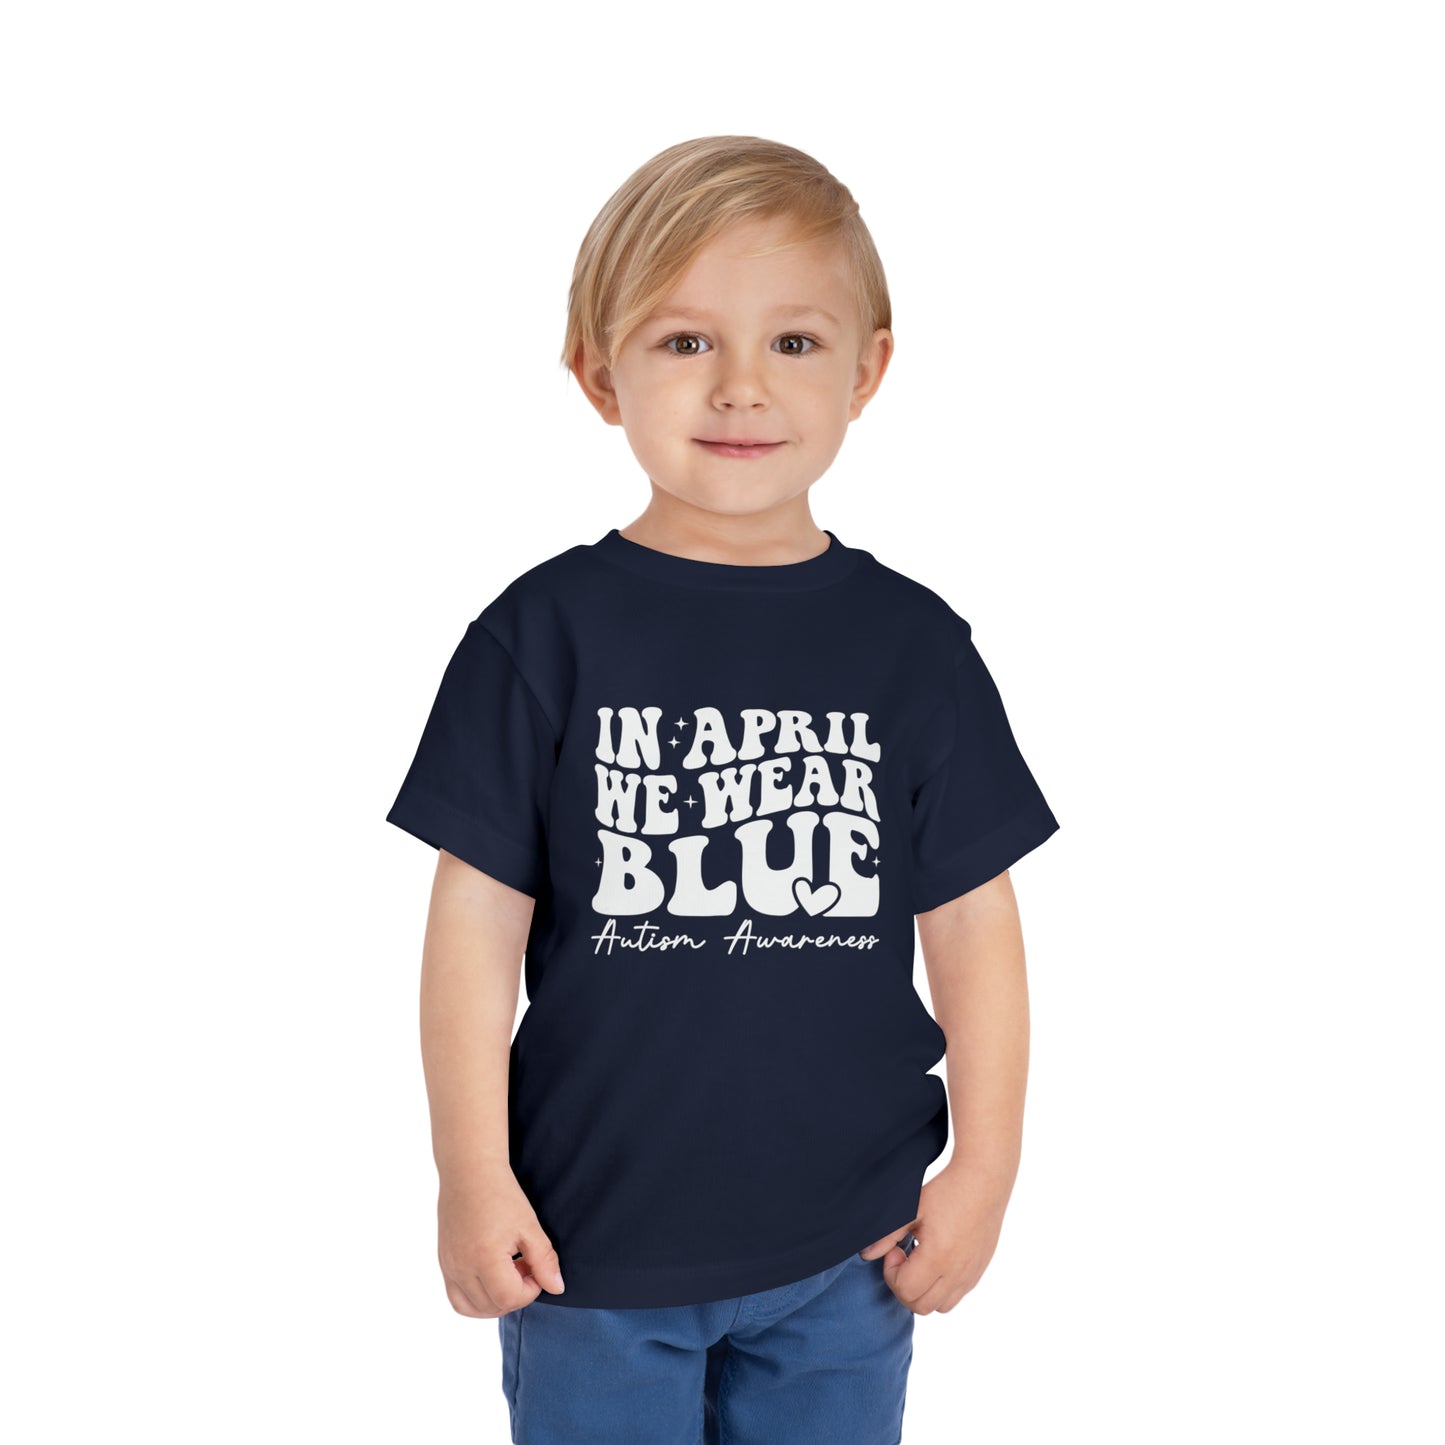 Copy of In April We Wear Blue Autism Awareness Advocate Toddler Short Sleeve Tee